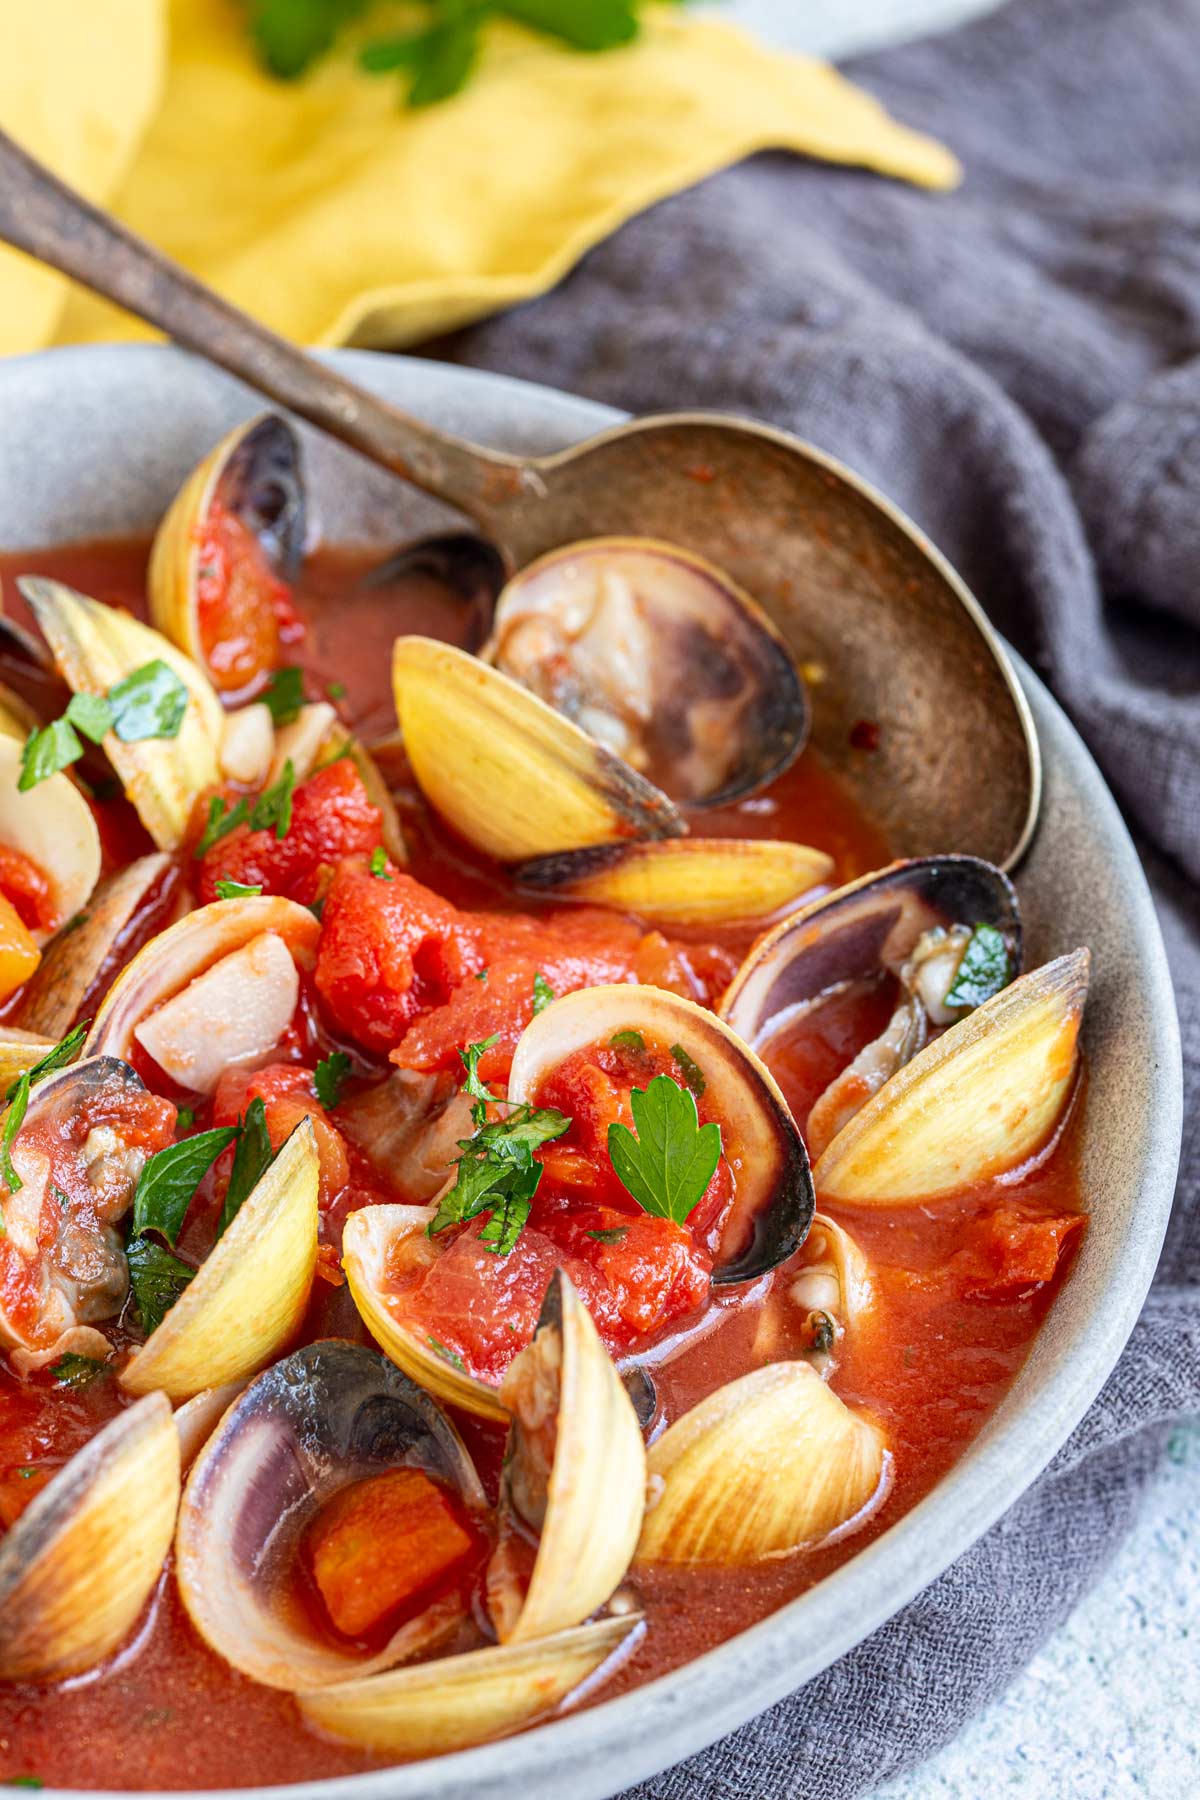 a spoon in a bowl of clams in a tomato broth with a yellow napkin